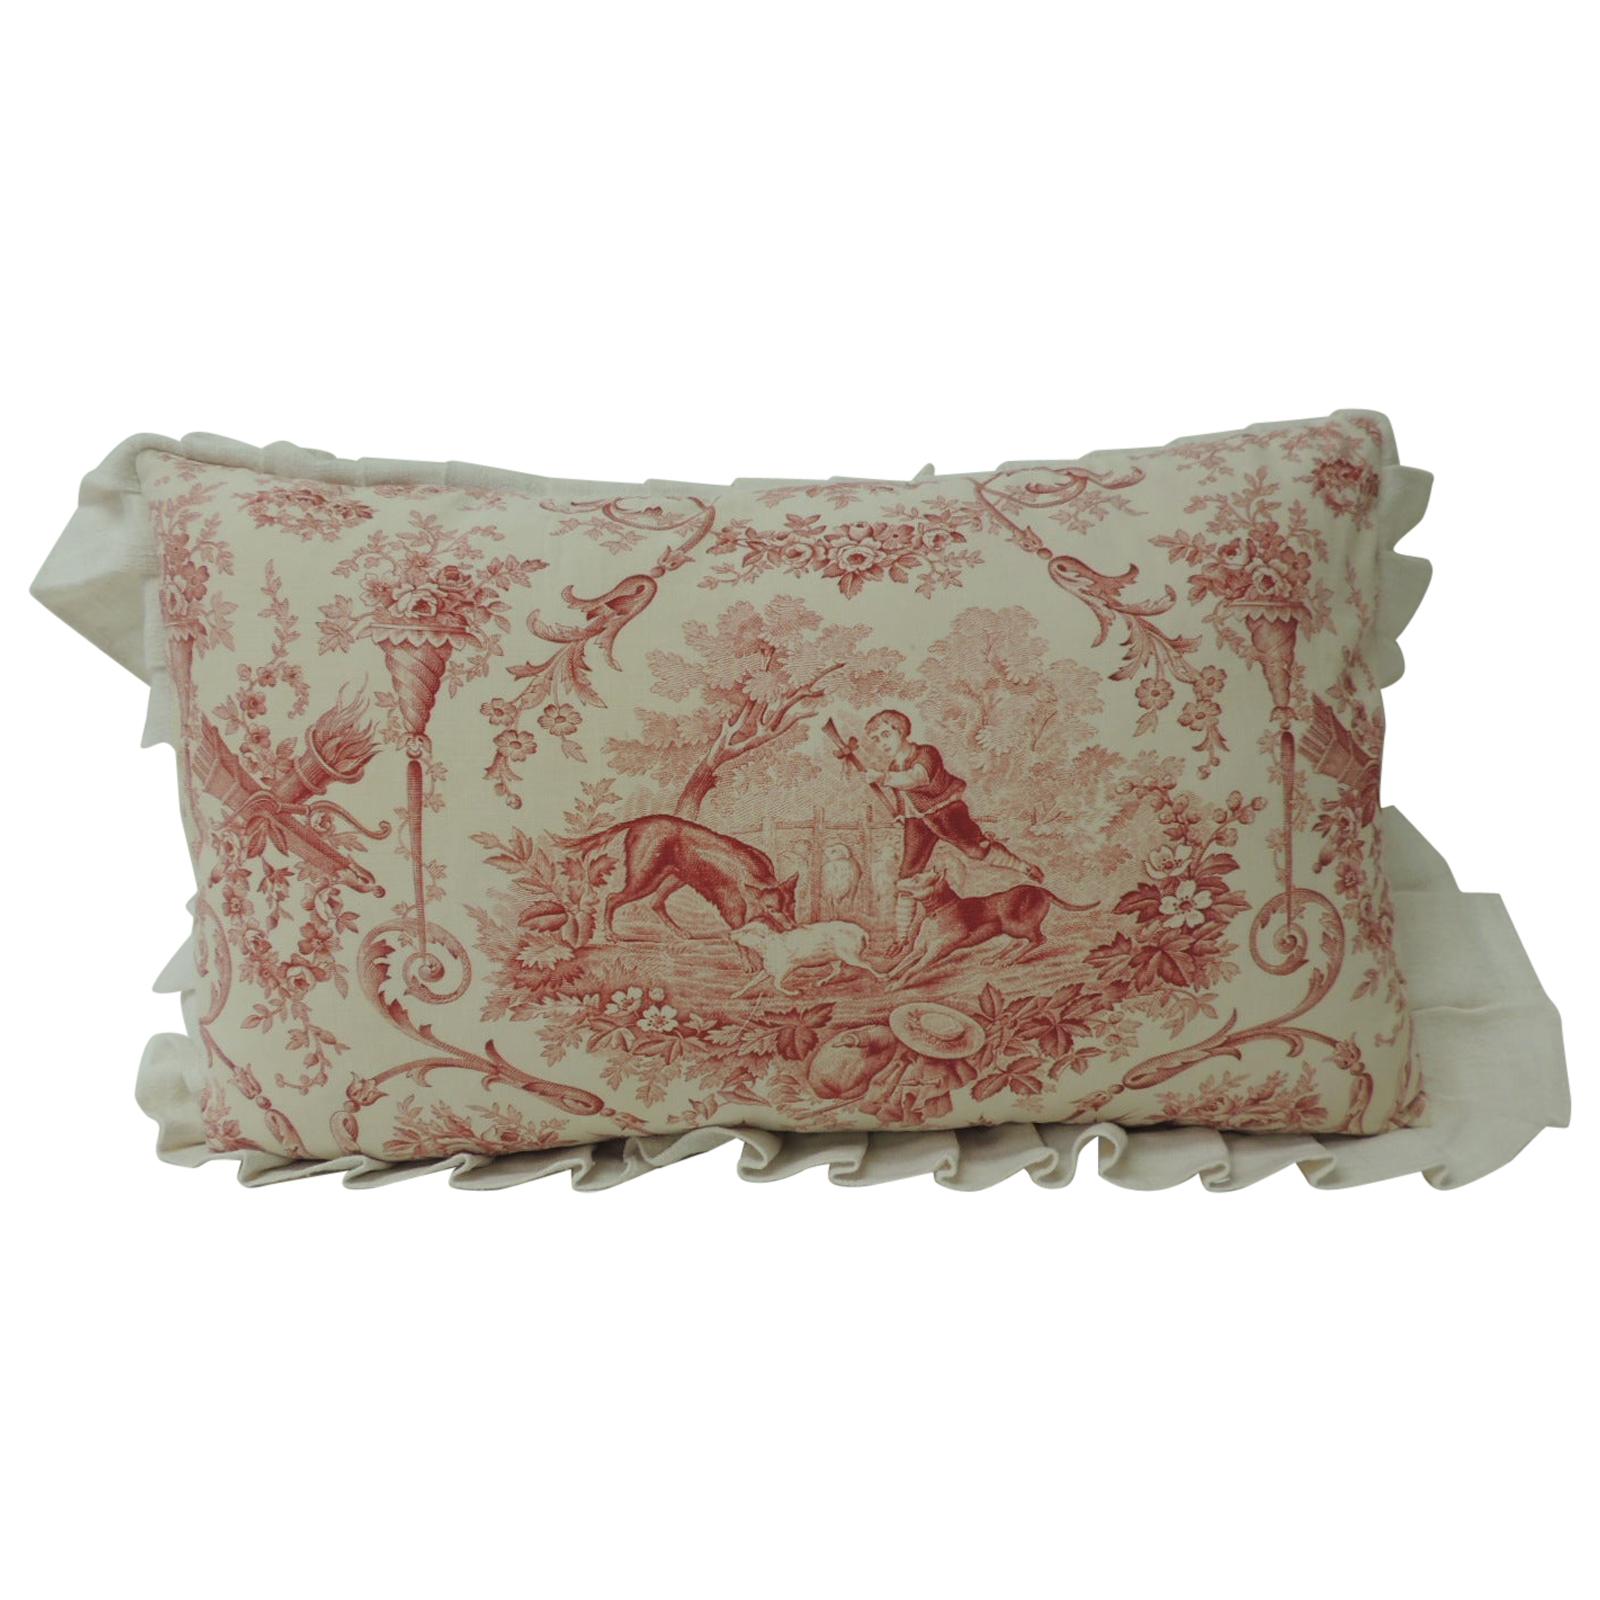 Antique French Toile Decorative Bolster Pillow with Grain Sack Trim